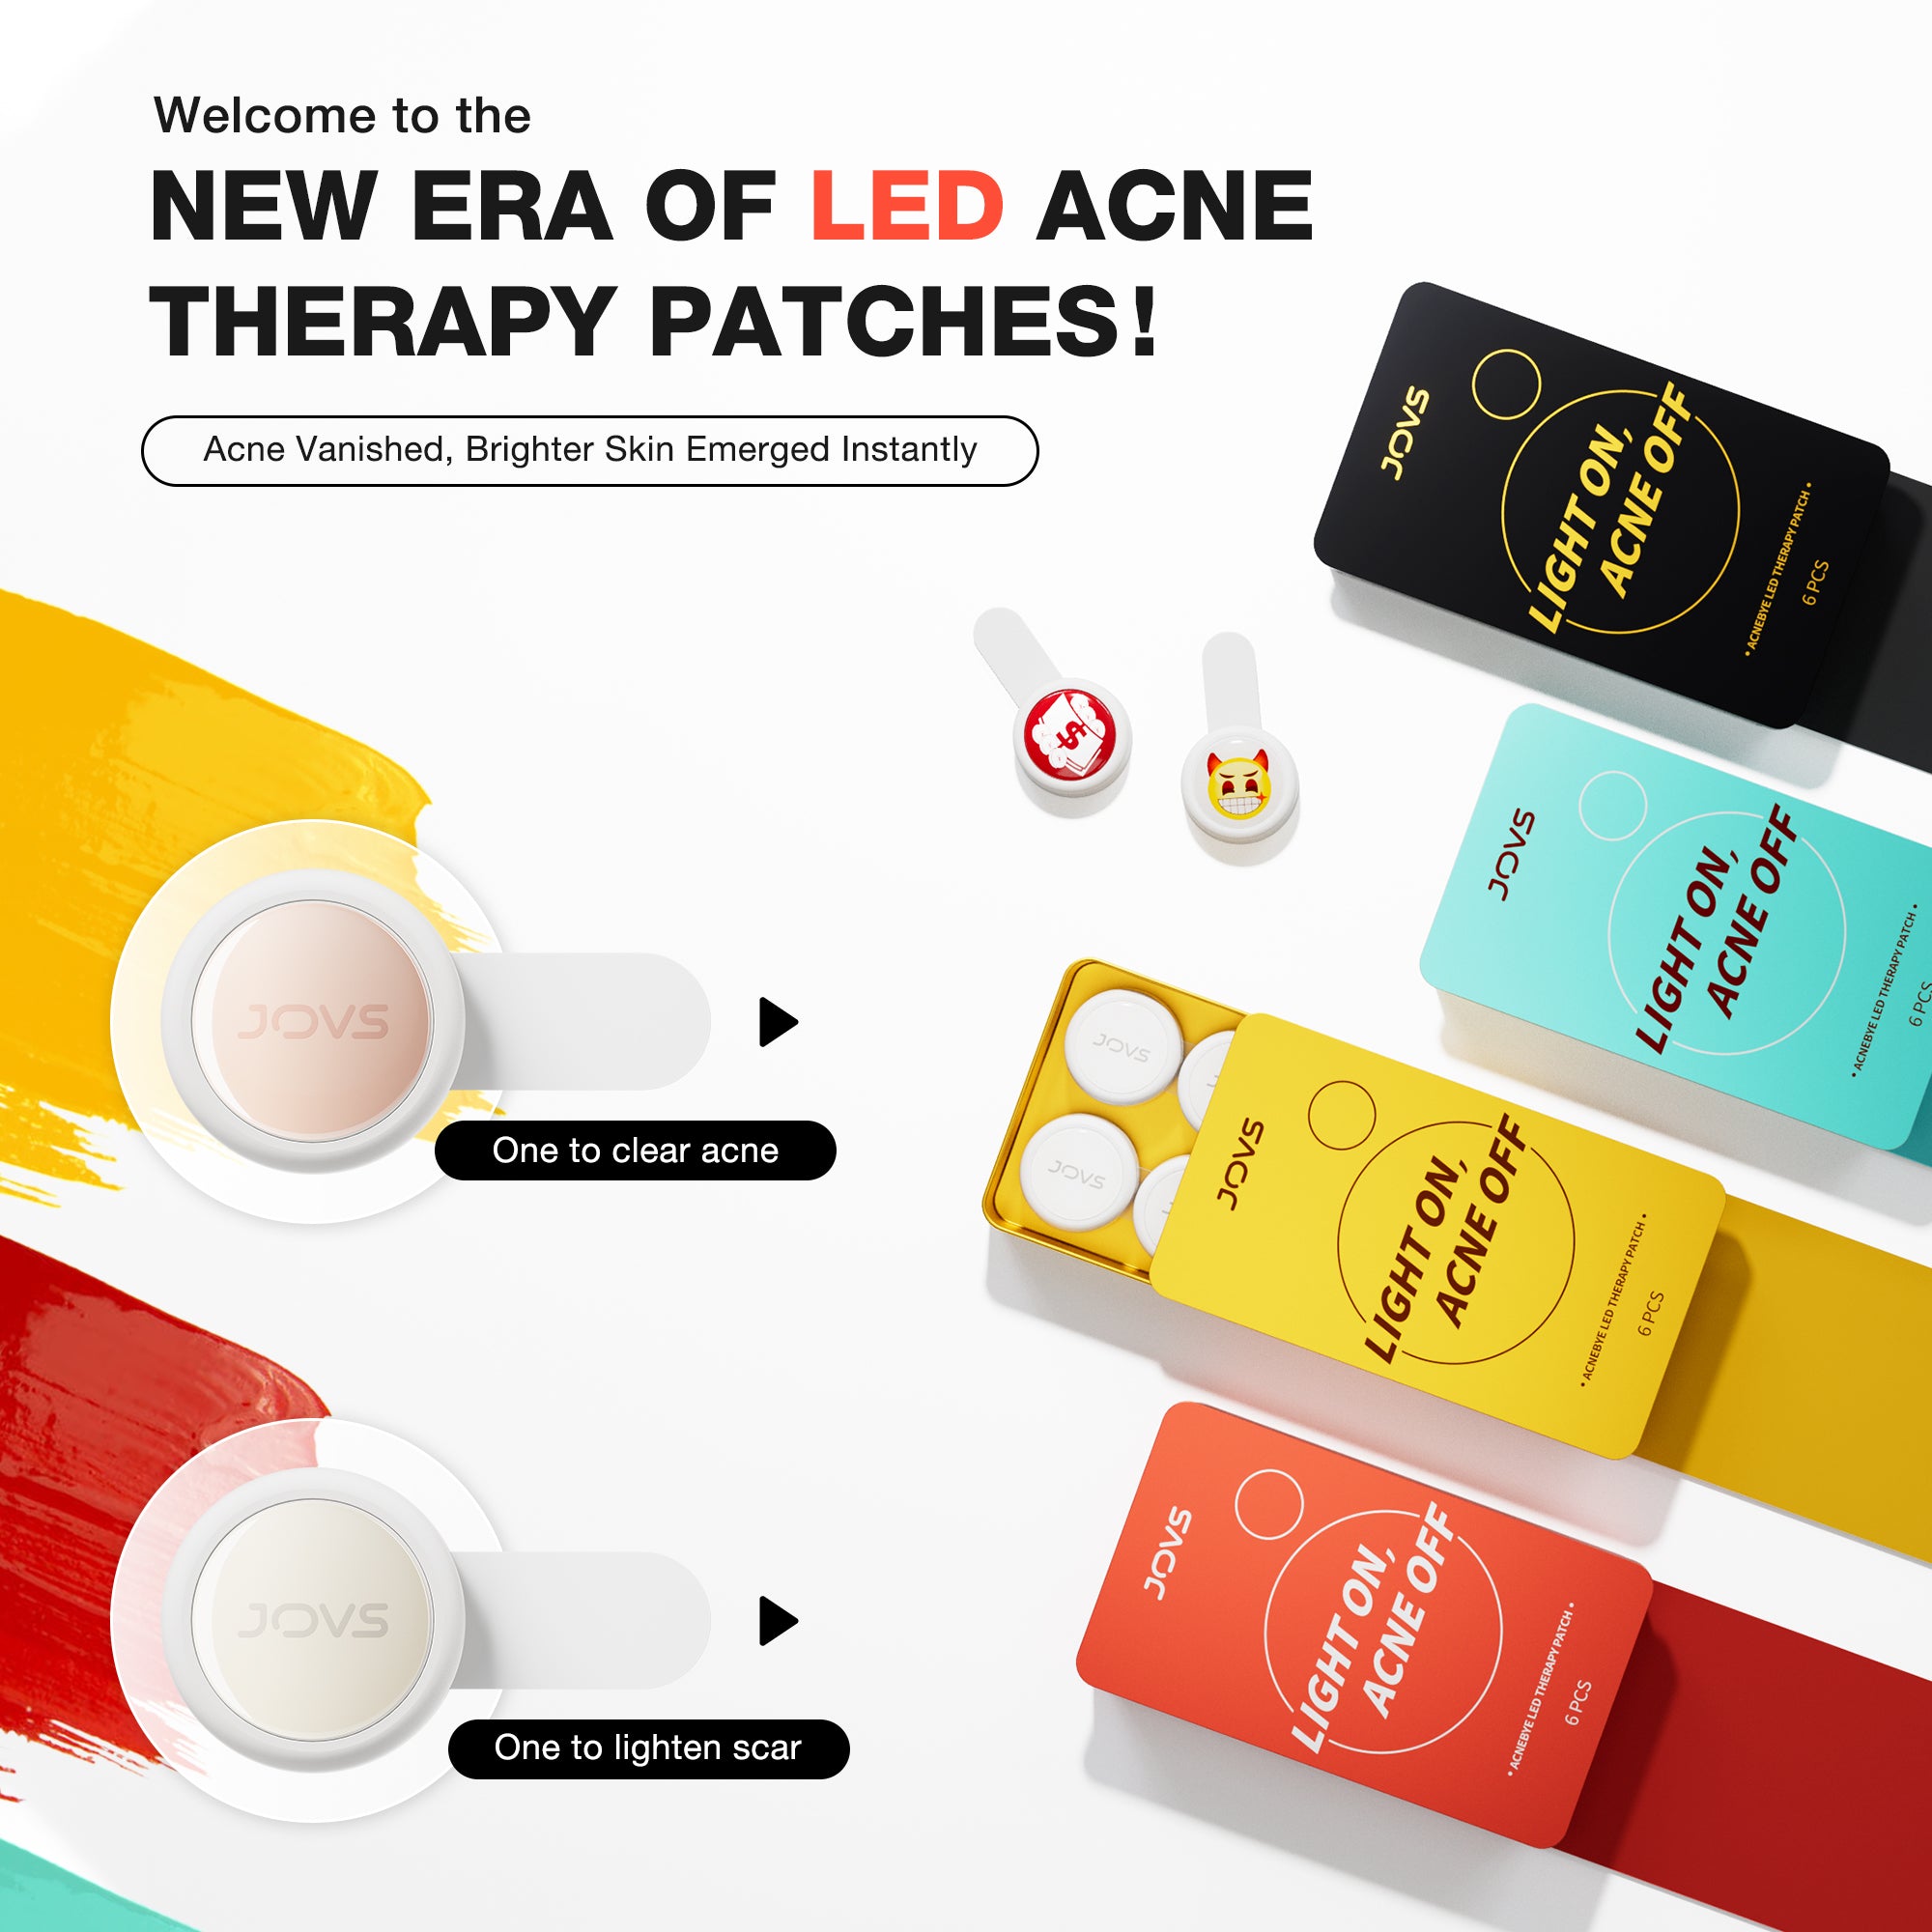 JOVS Acnebye LED Therapy Patch showcasing the new era of acne treatment with visible results and innovative technology.